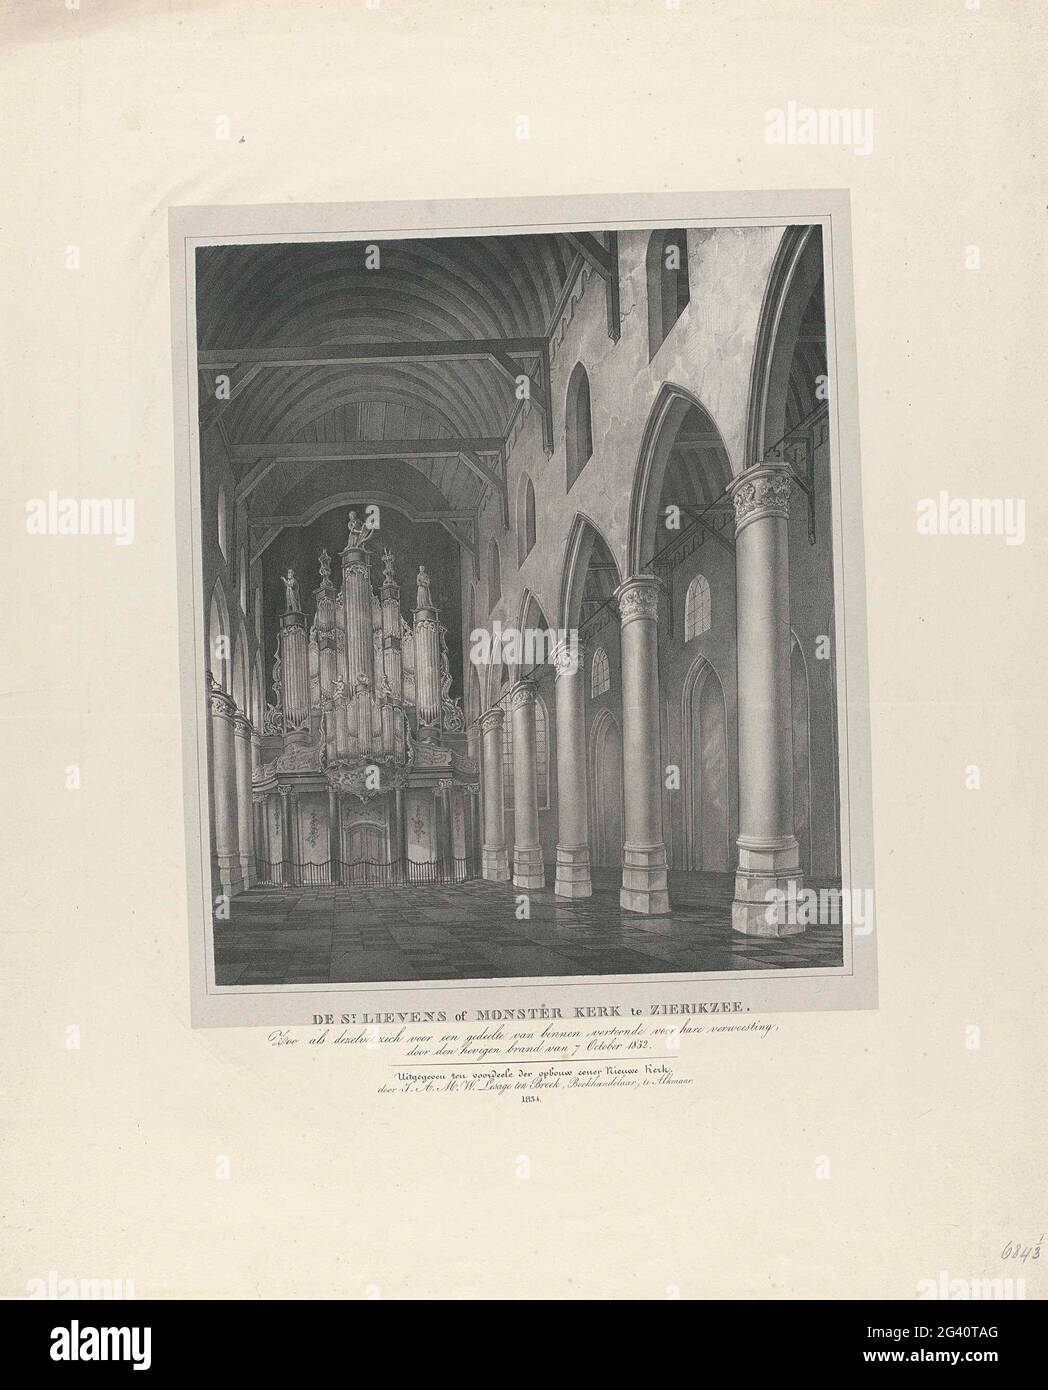 Interior of the Sint-Lievensmonsterkerk in Zierikzee, before the fire of 1832; The St. Lievens or Monster Church in Zierikzee. For a part of inside inside for her destruction, such as a part of 7 October 1832. Interior of the Sint-Lievensmonsterkerk in Zierikzee, in welfare, before the fire of 6 October 1832. View of the interior to the organ to the organ . The church has a wooden ceiling. On the right a side aisle, separated from the ship by columns. Stock Photo